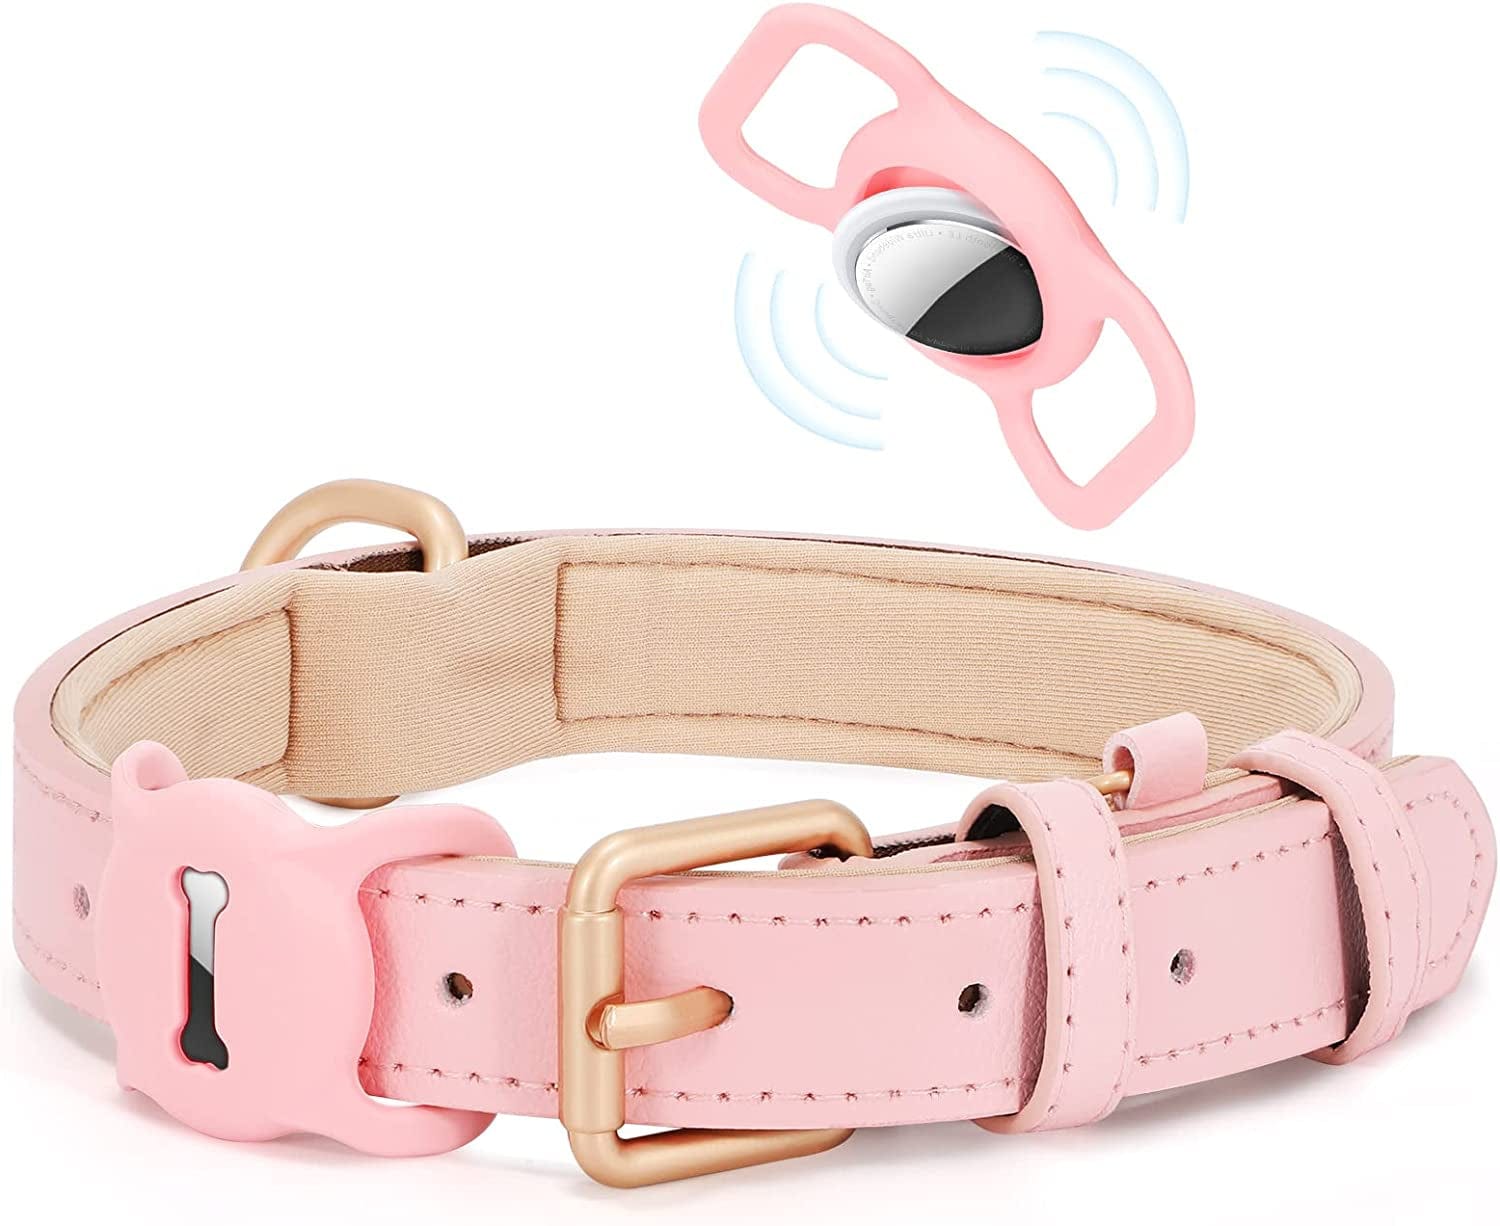 WHIPPY Airtag Leather Dog Collar GPS Tracker Air Tag Puppy Collar Adjustable Soft Leather Padded Dog Collar with Airtag Holder Case for Small Medium Large Dog Pet Backpack,Pink,M Electronics > GPS Accessories > GPS Cases WHIPPY A-pink+airtag case S:Neck 13"-17",Width 0.78" 